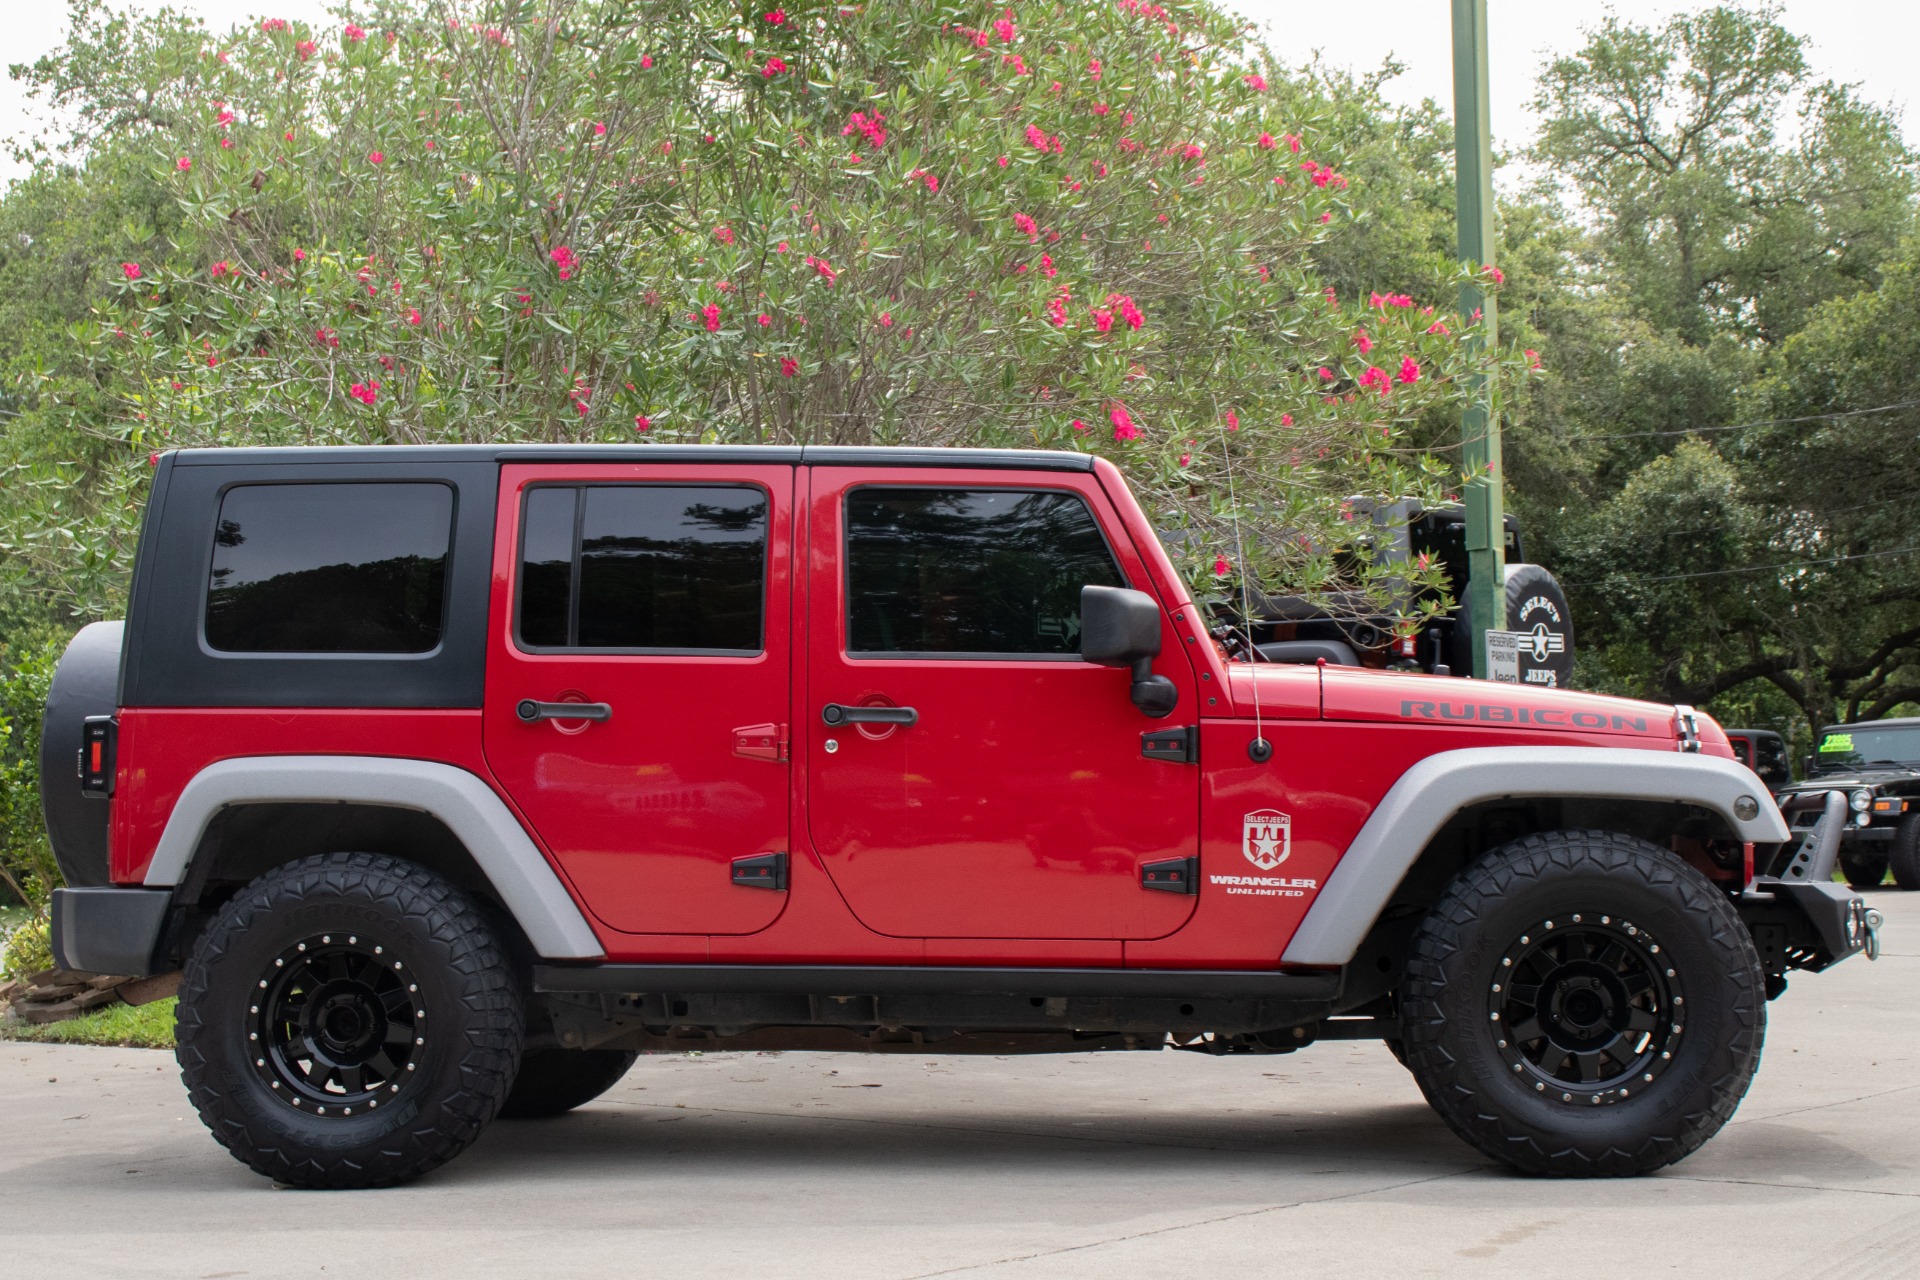 Used 2008 Jeep Wrangler Unlimited Rubicon For Sale ($18,995) | Select Jeeps  Inc. Stock #576299